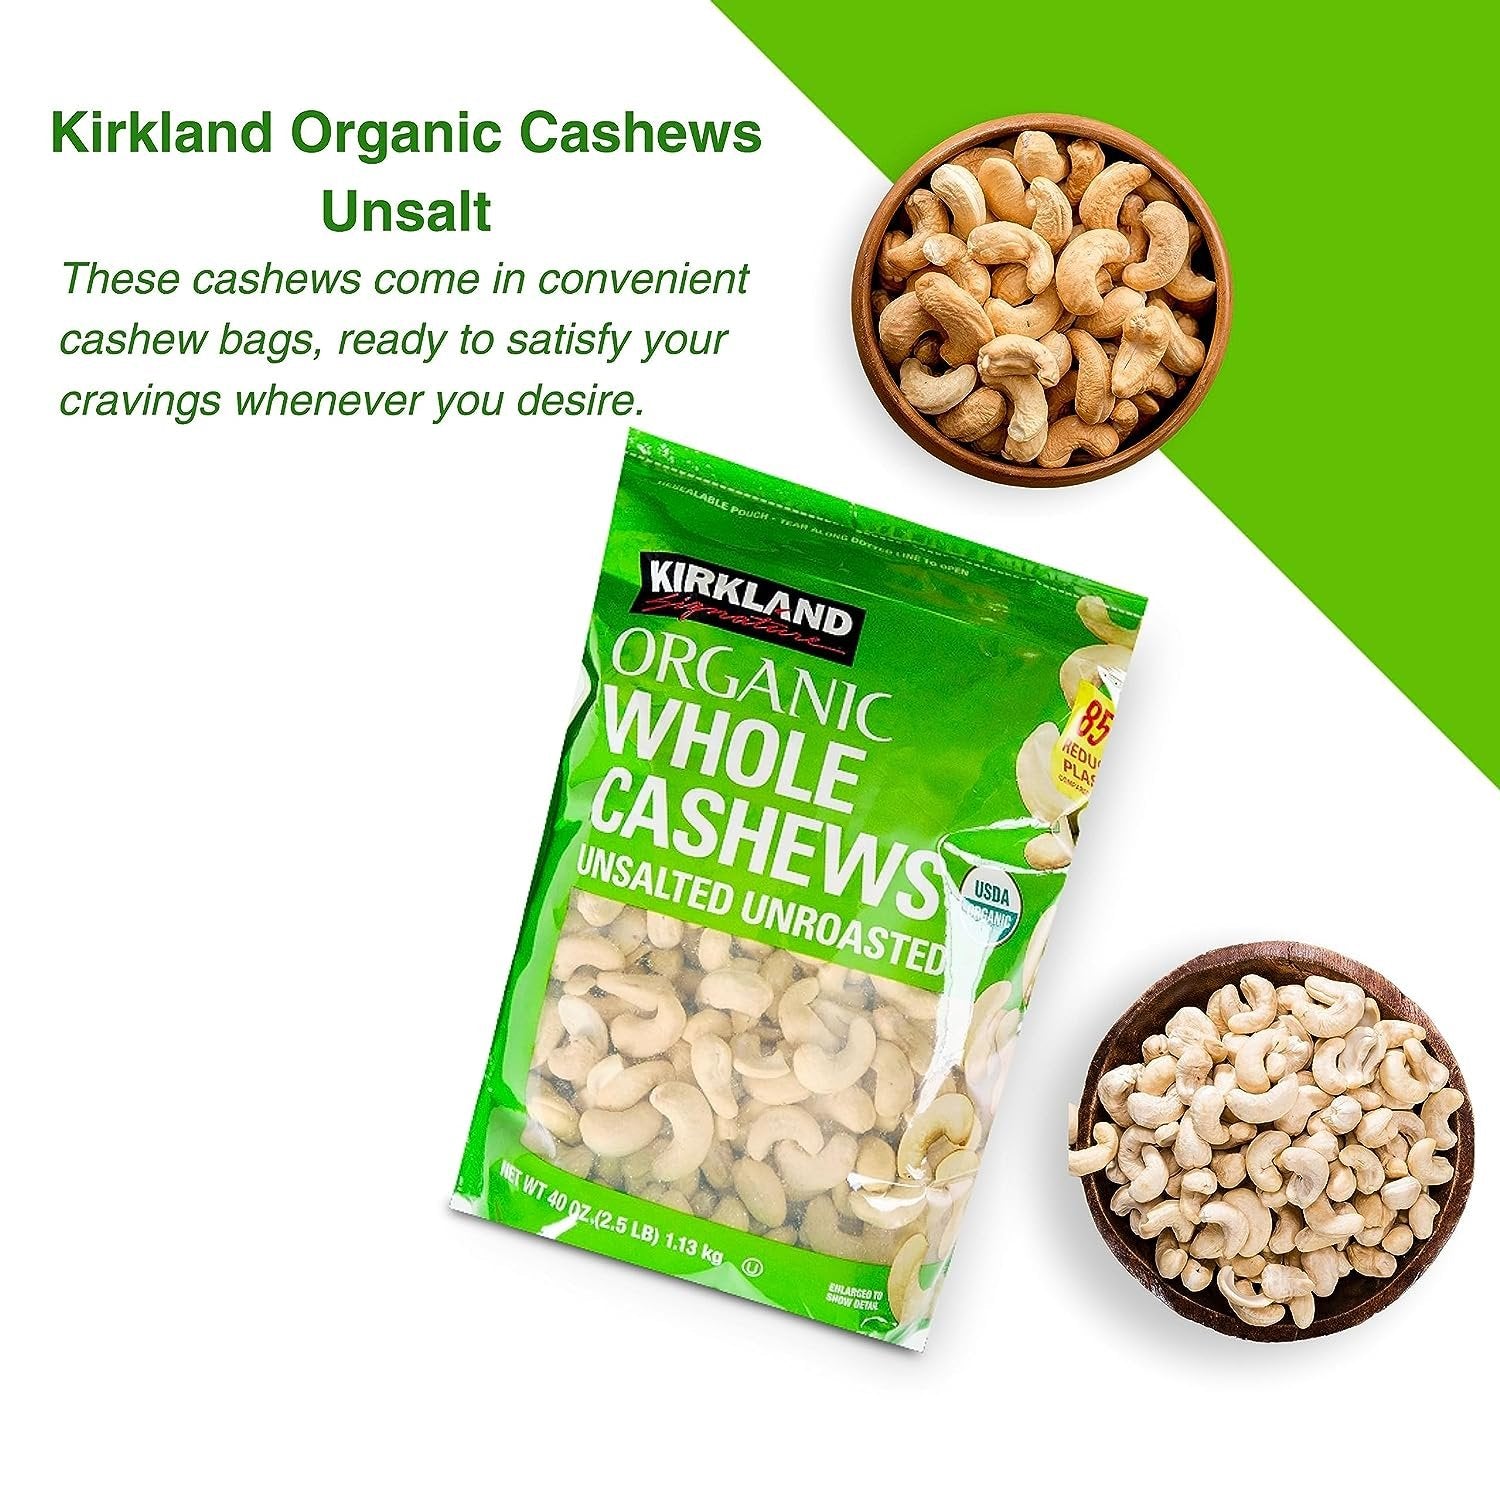 Worldwide Nutrition Bundle, 2 Items: Kirkland Signature Organic Whole Cashews Unsalted Unroasted - Perfect for Snacking, Cooking, and Gifting - 40 Ounce Cashew Nuts Pack and Multi-Purpose Key Chain